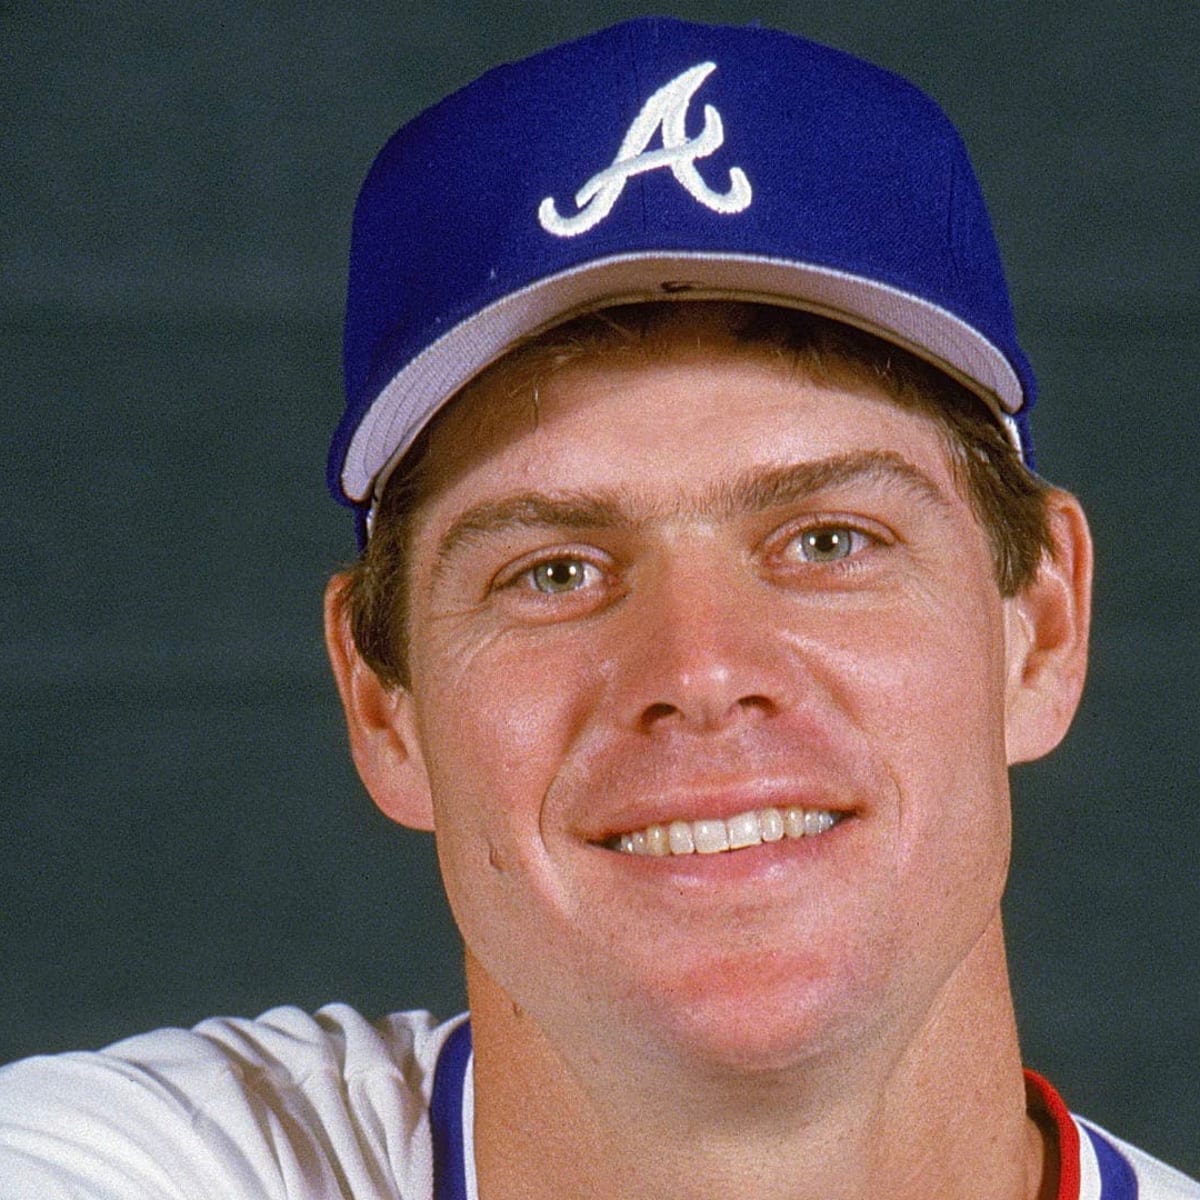 Dale Murphy of the Atlanta Braves follows through on his swing